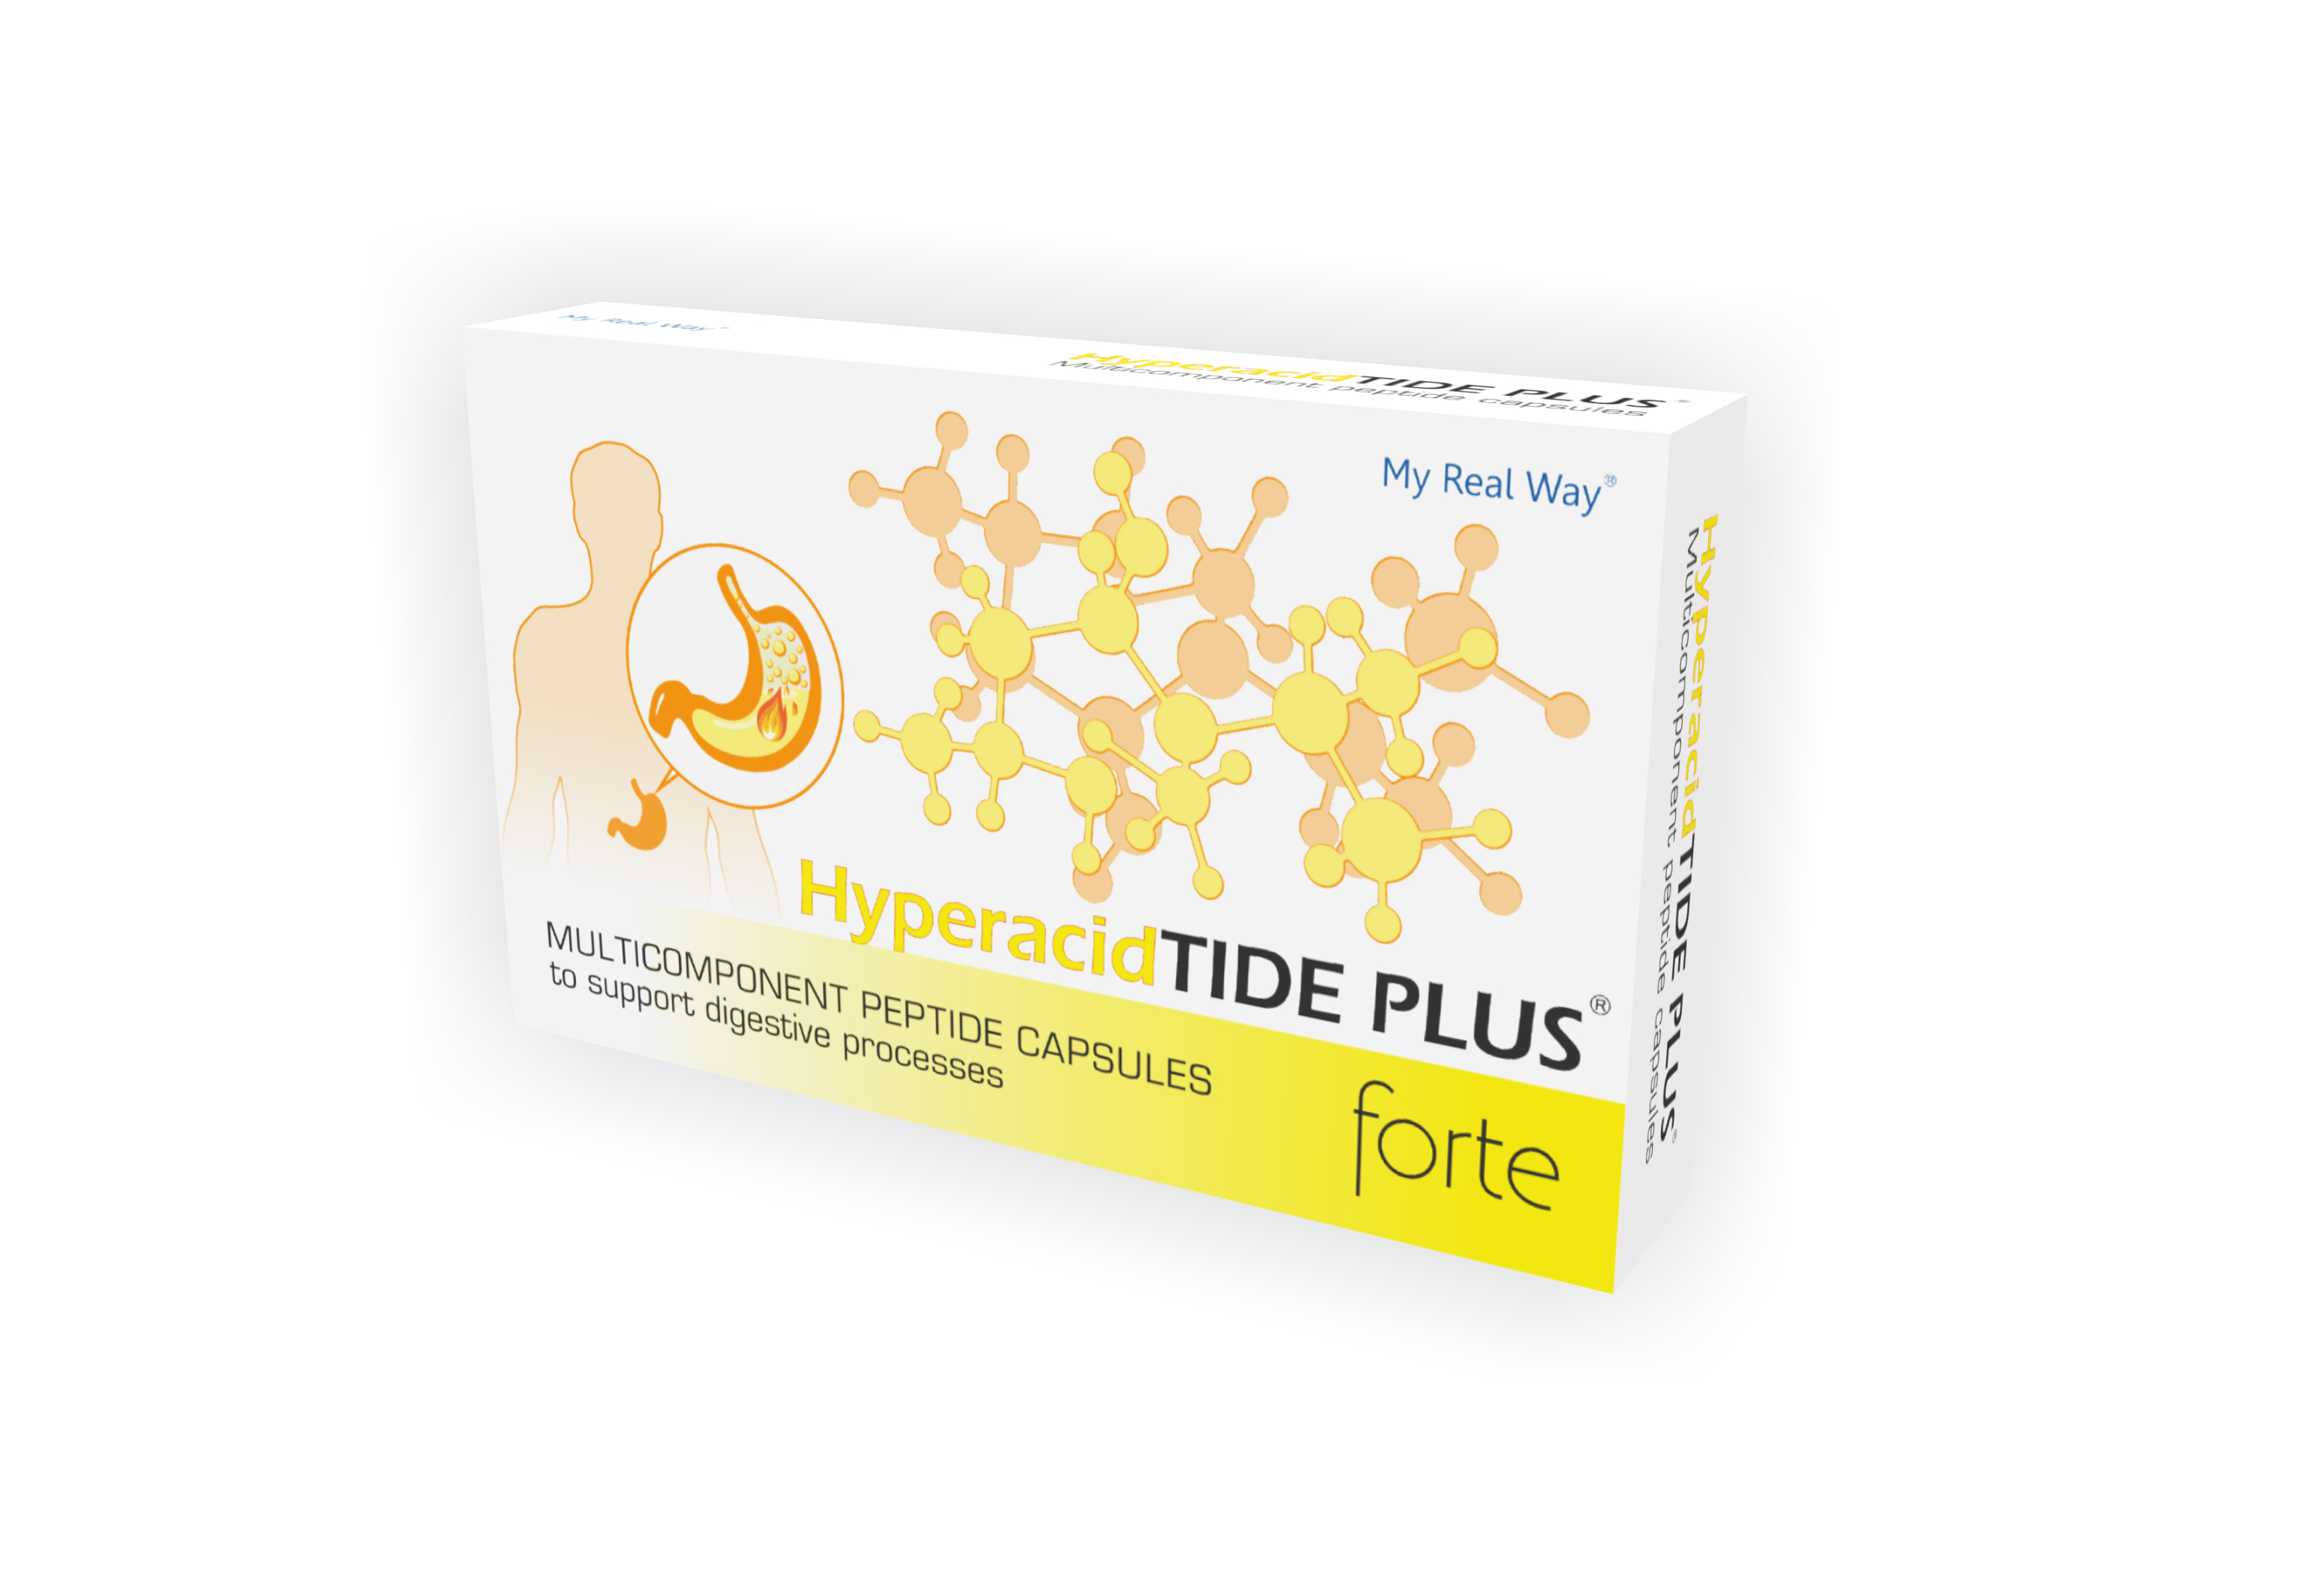 HyperacidTIDE PLUS forte peptides for gastric hyperacidity